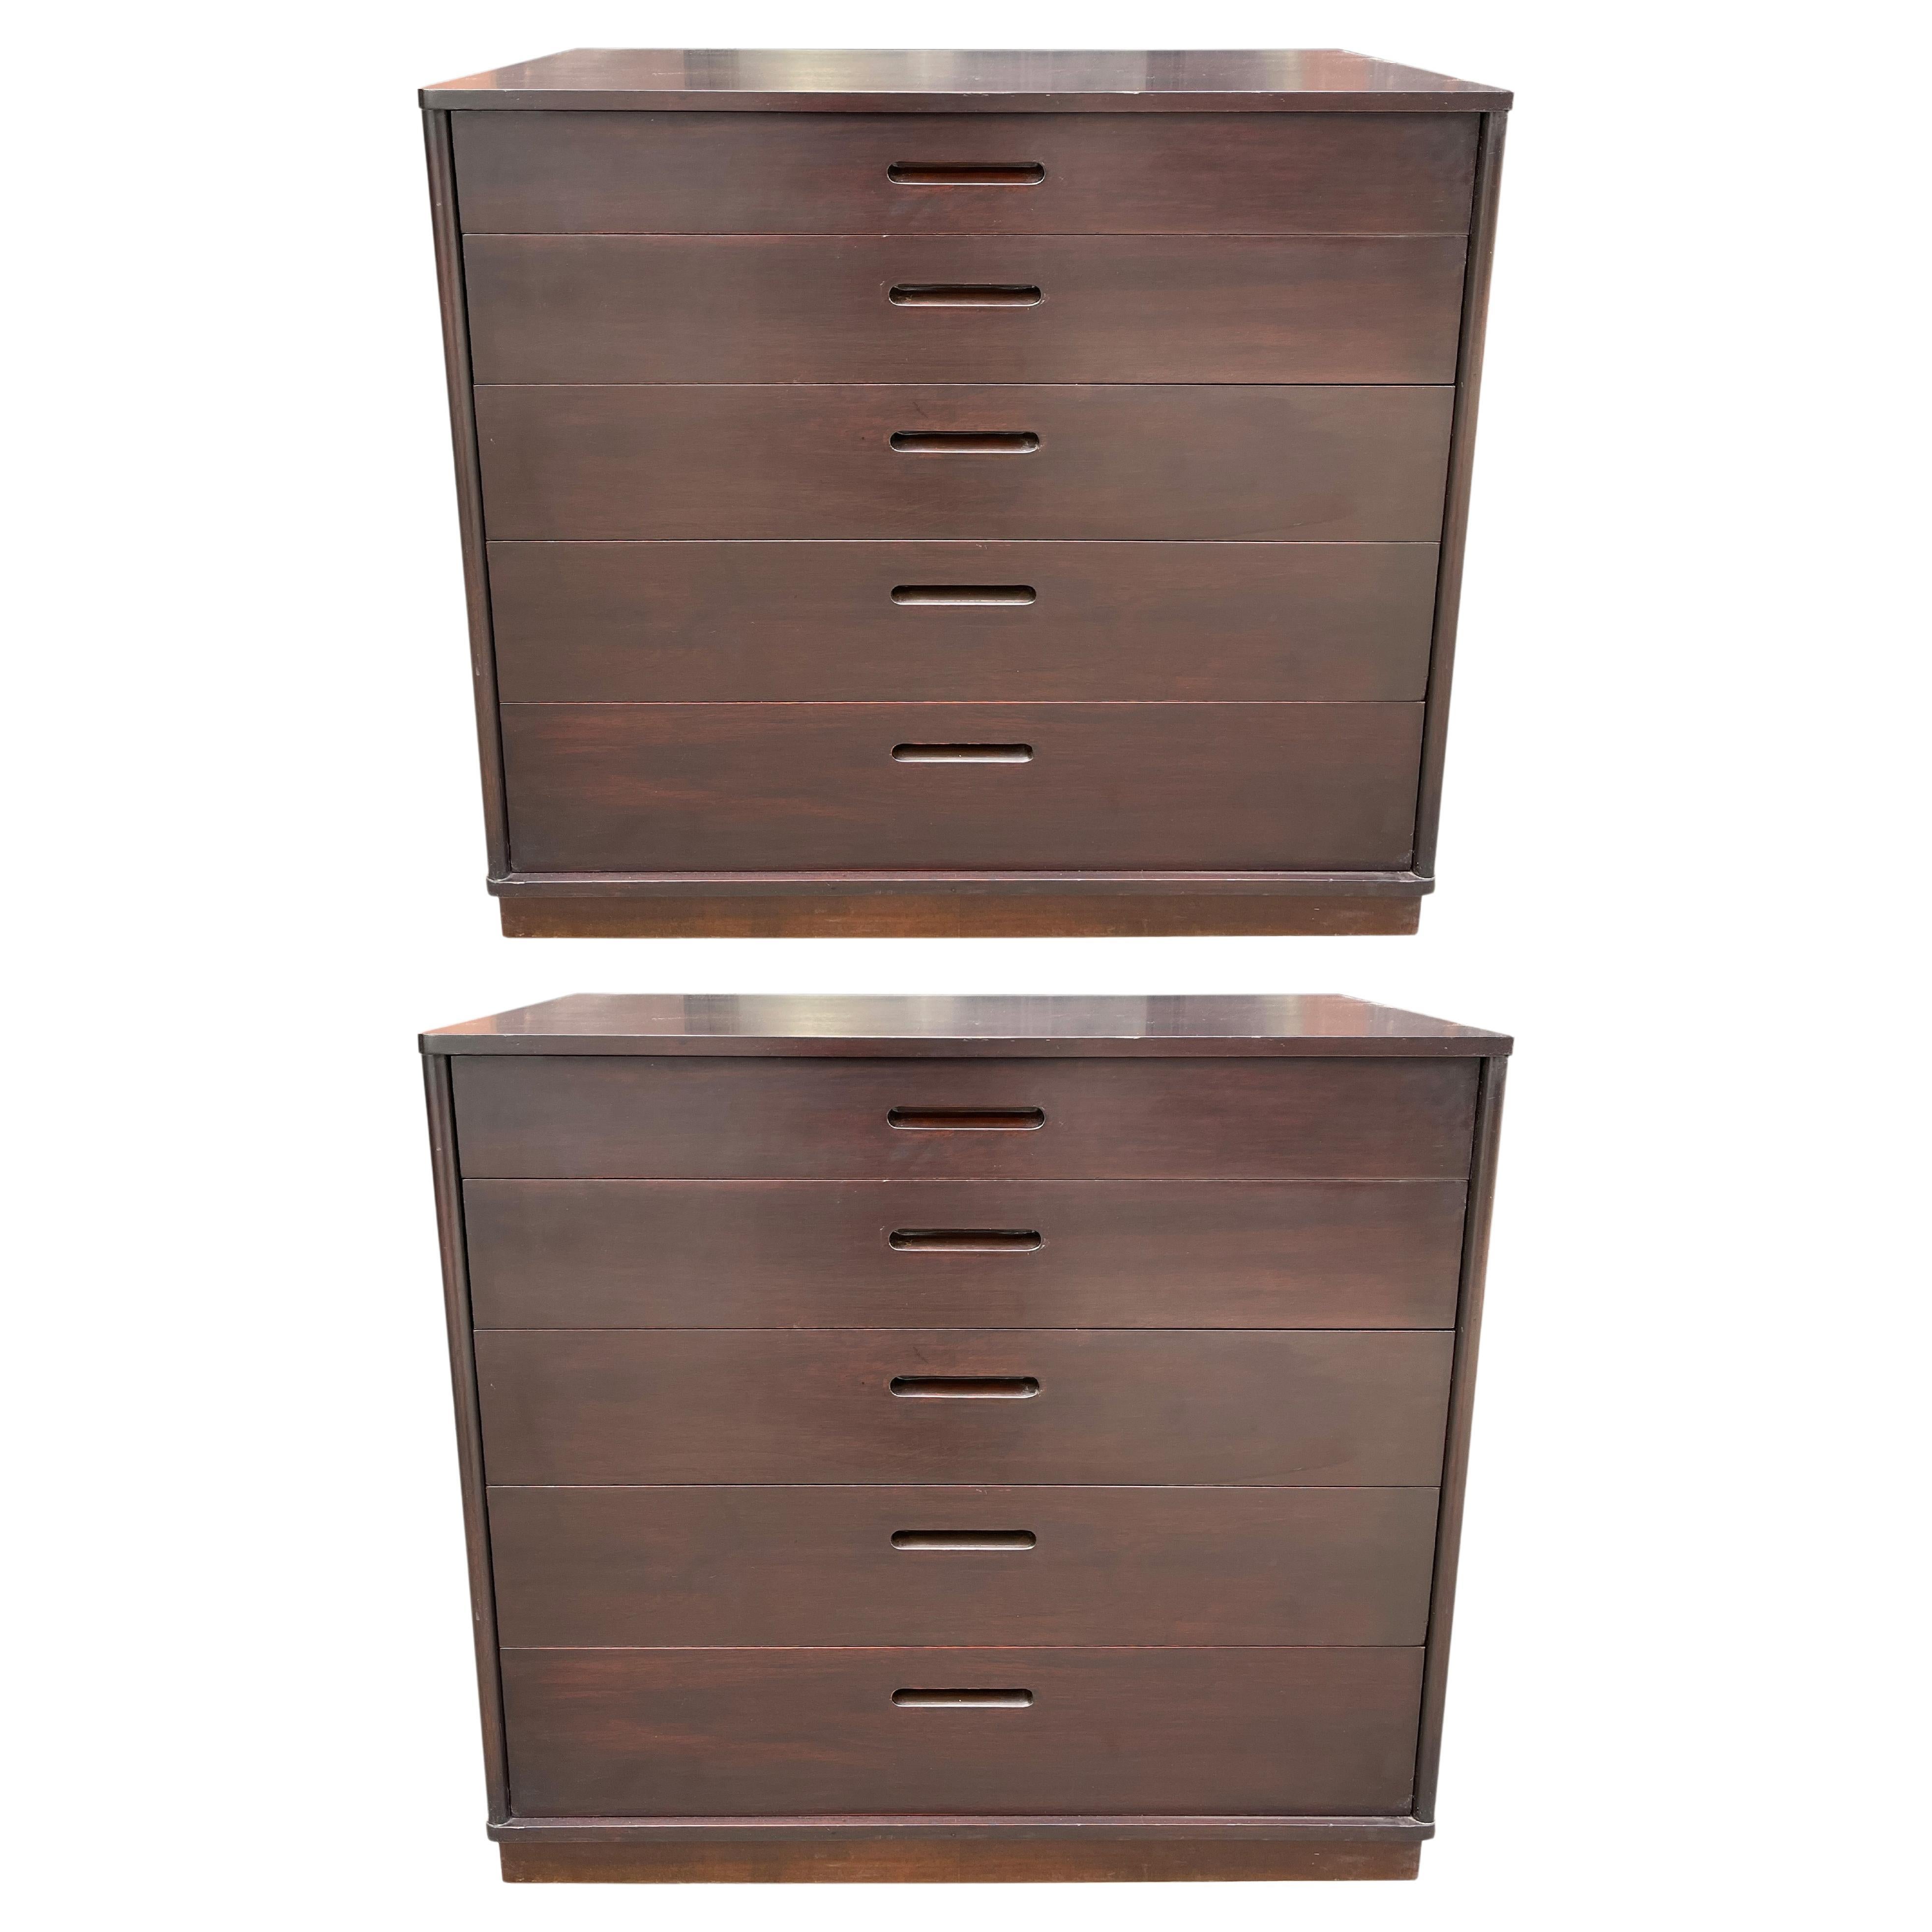 Midcentury Chest of Drawers by Edward Wormley for Dunbar  (Pair)